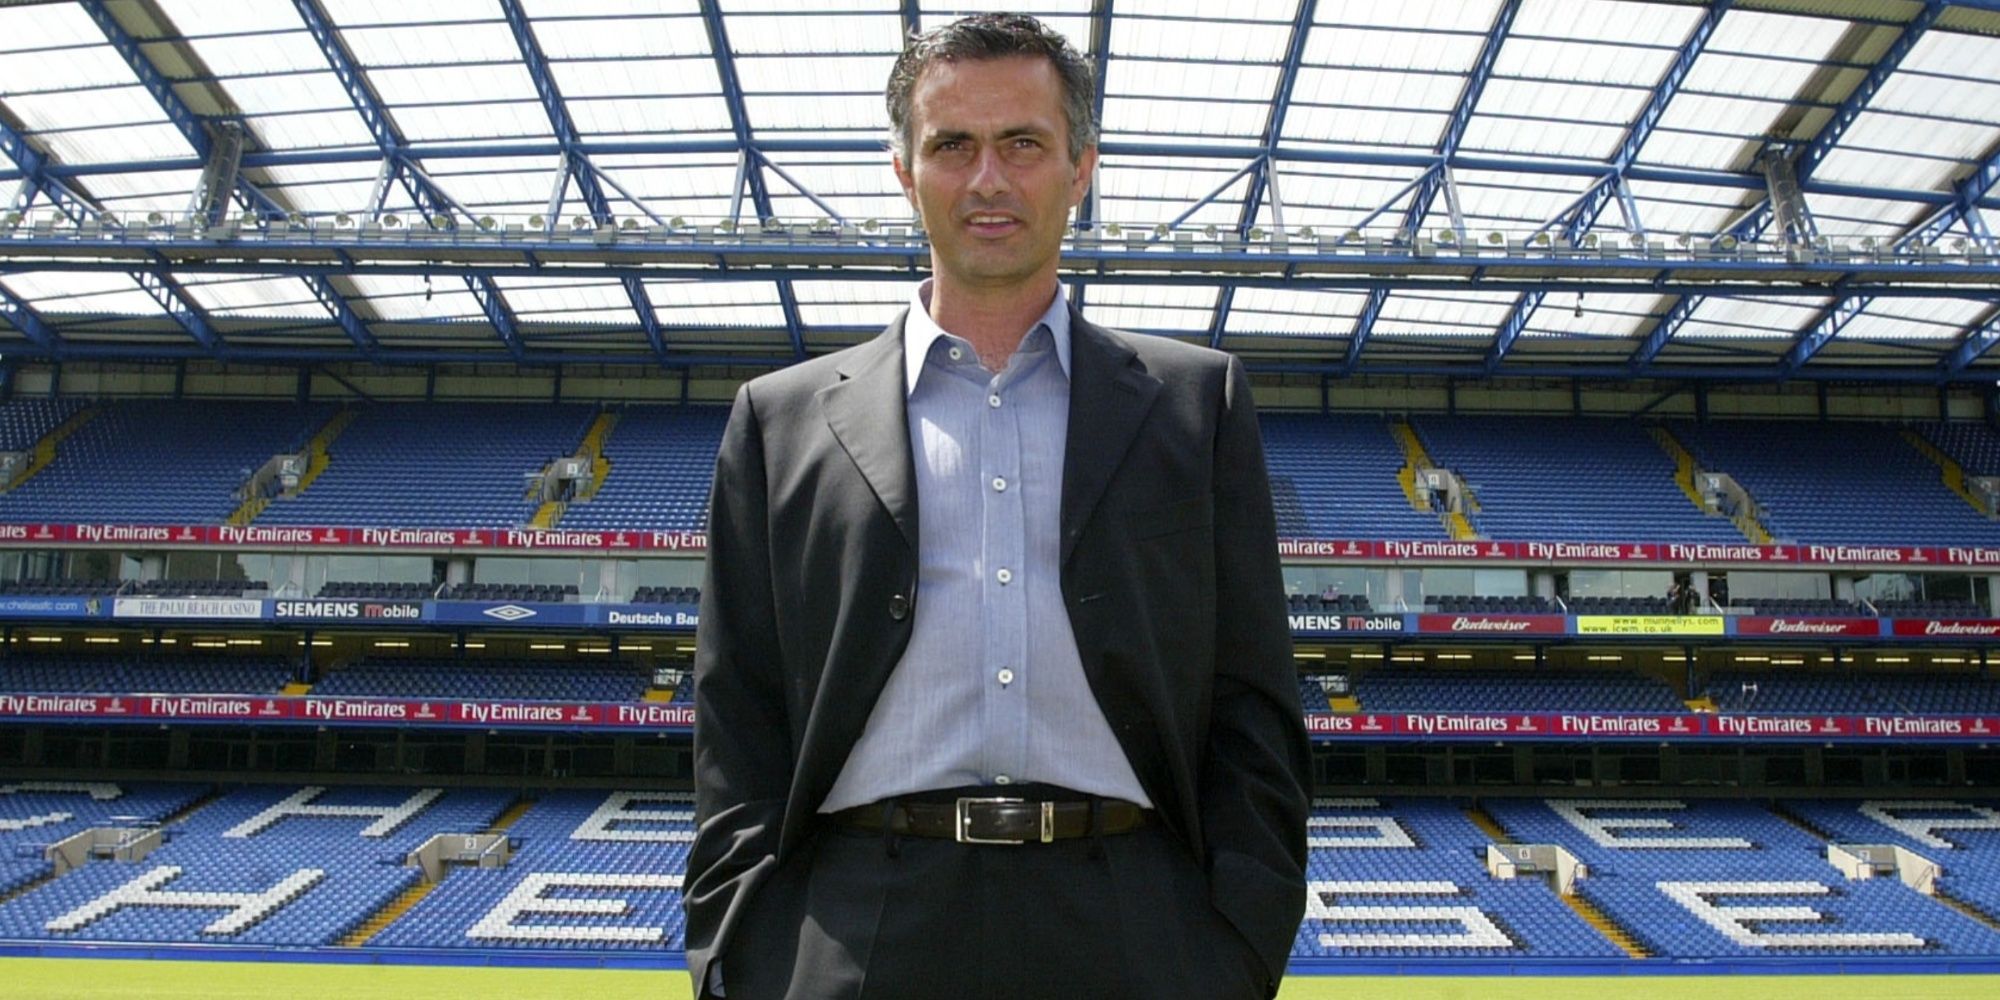 New Chelsea manager Jose Mourinho in 2004.